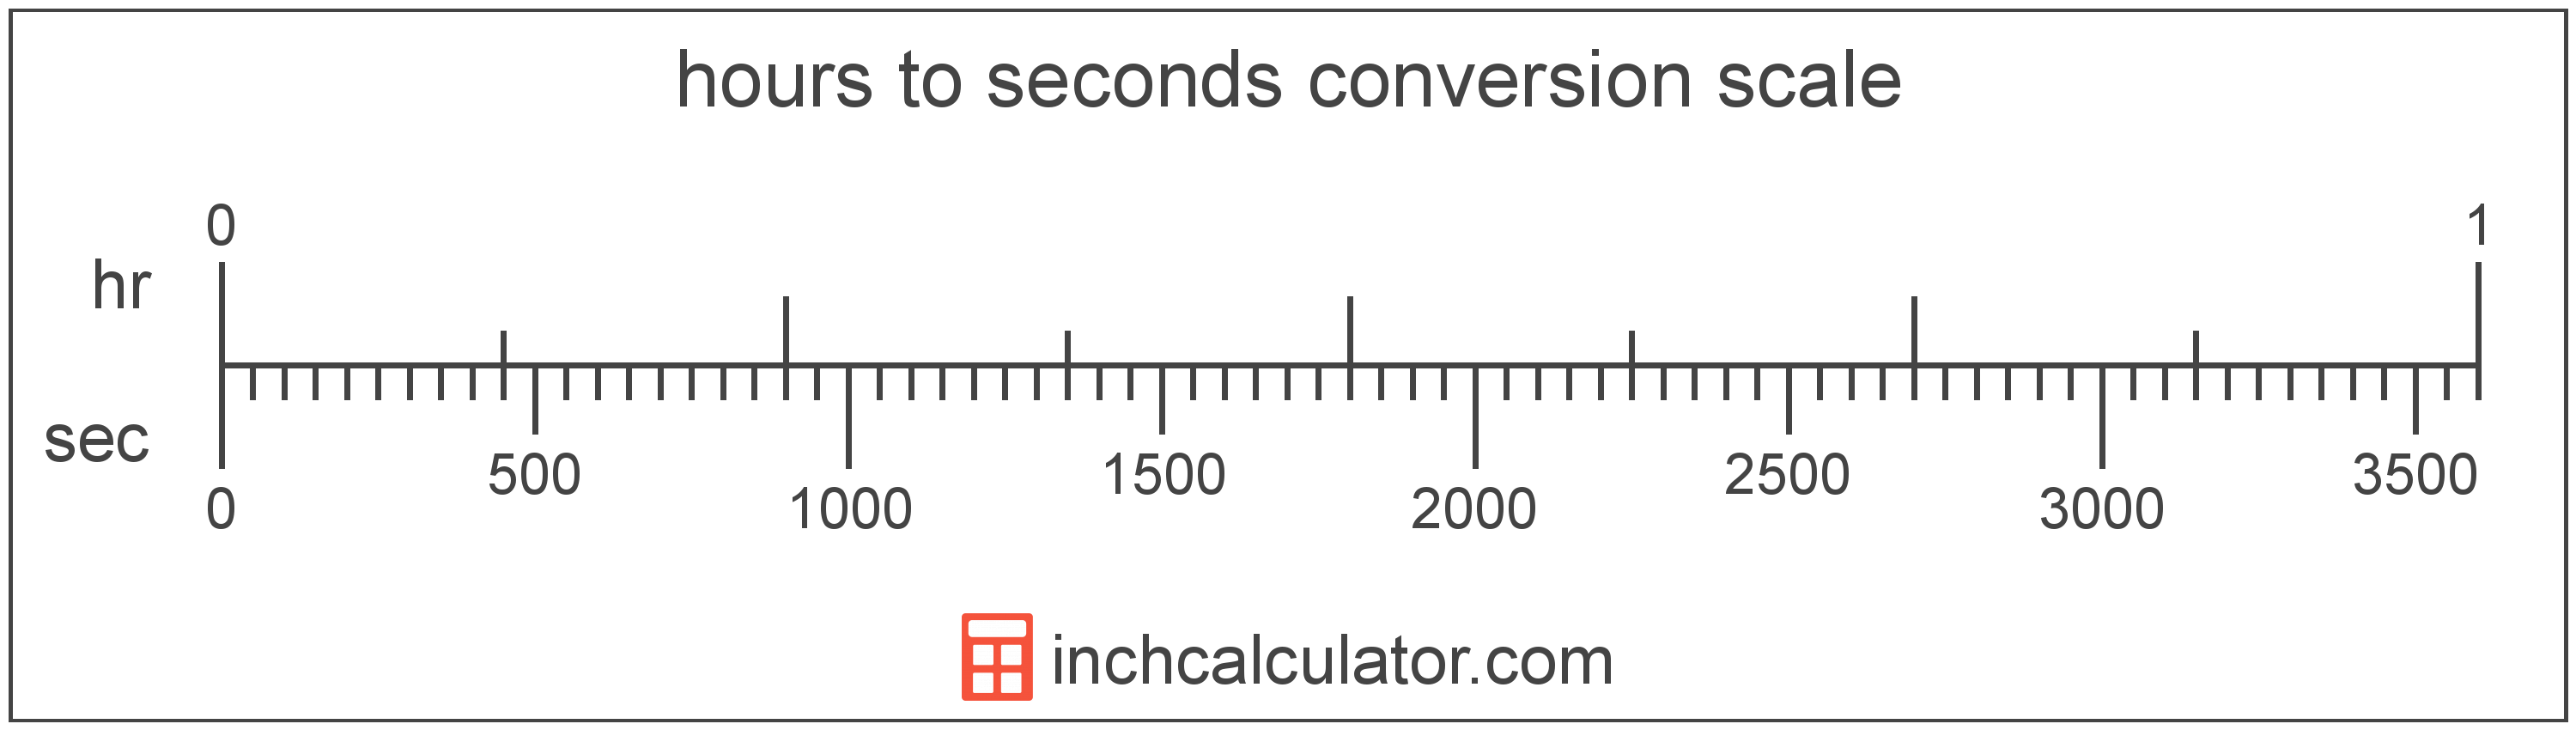 conversion scale showing seconds and equivalent hours time values